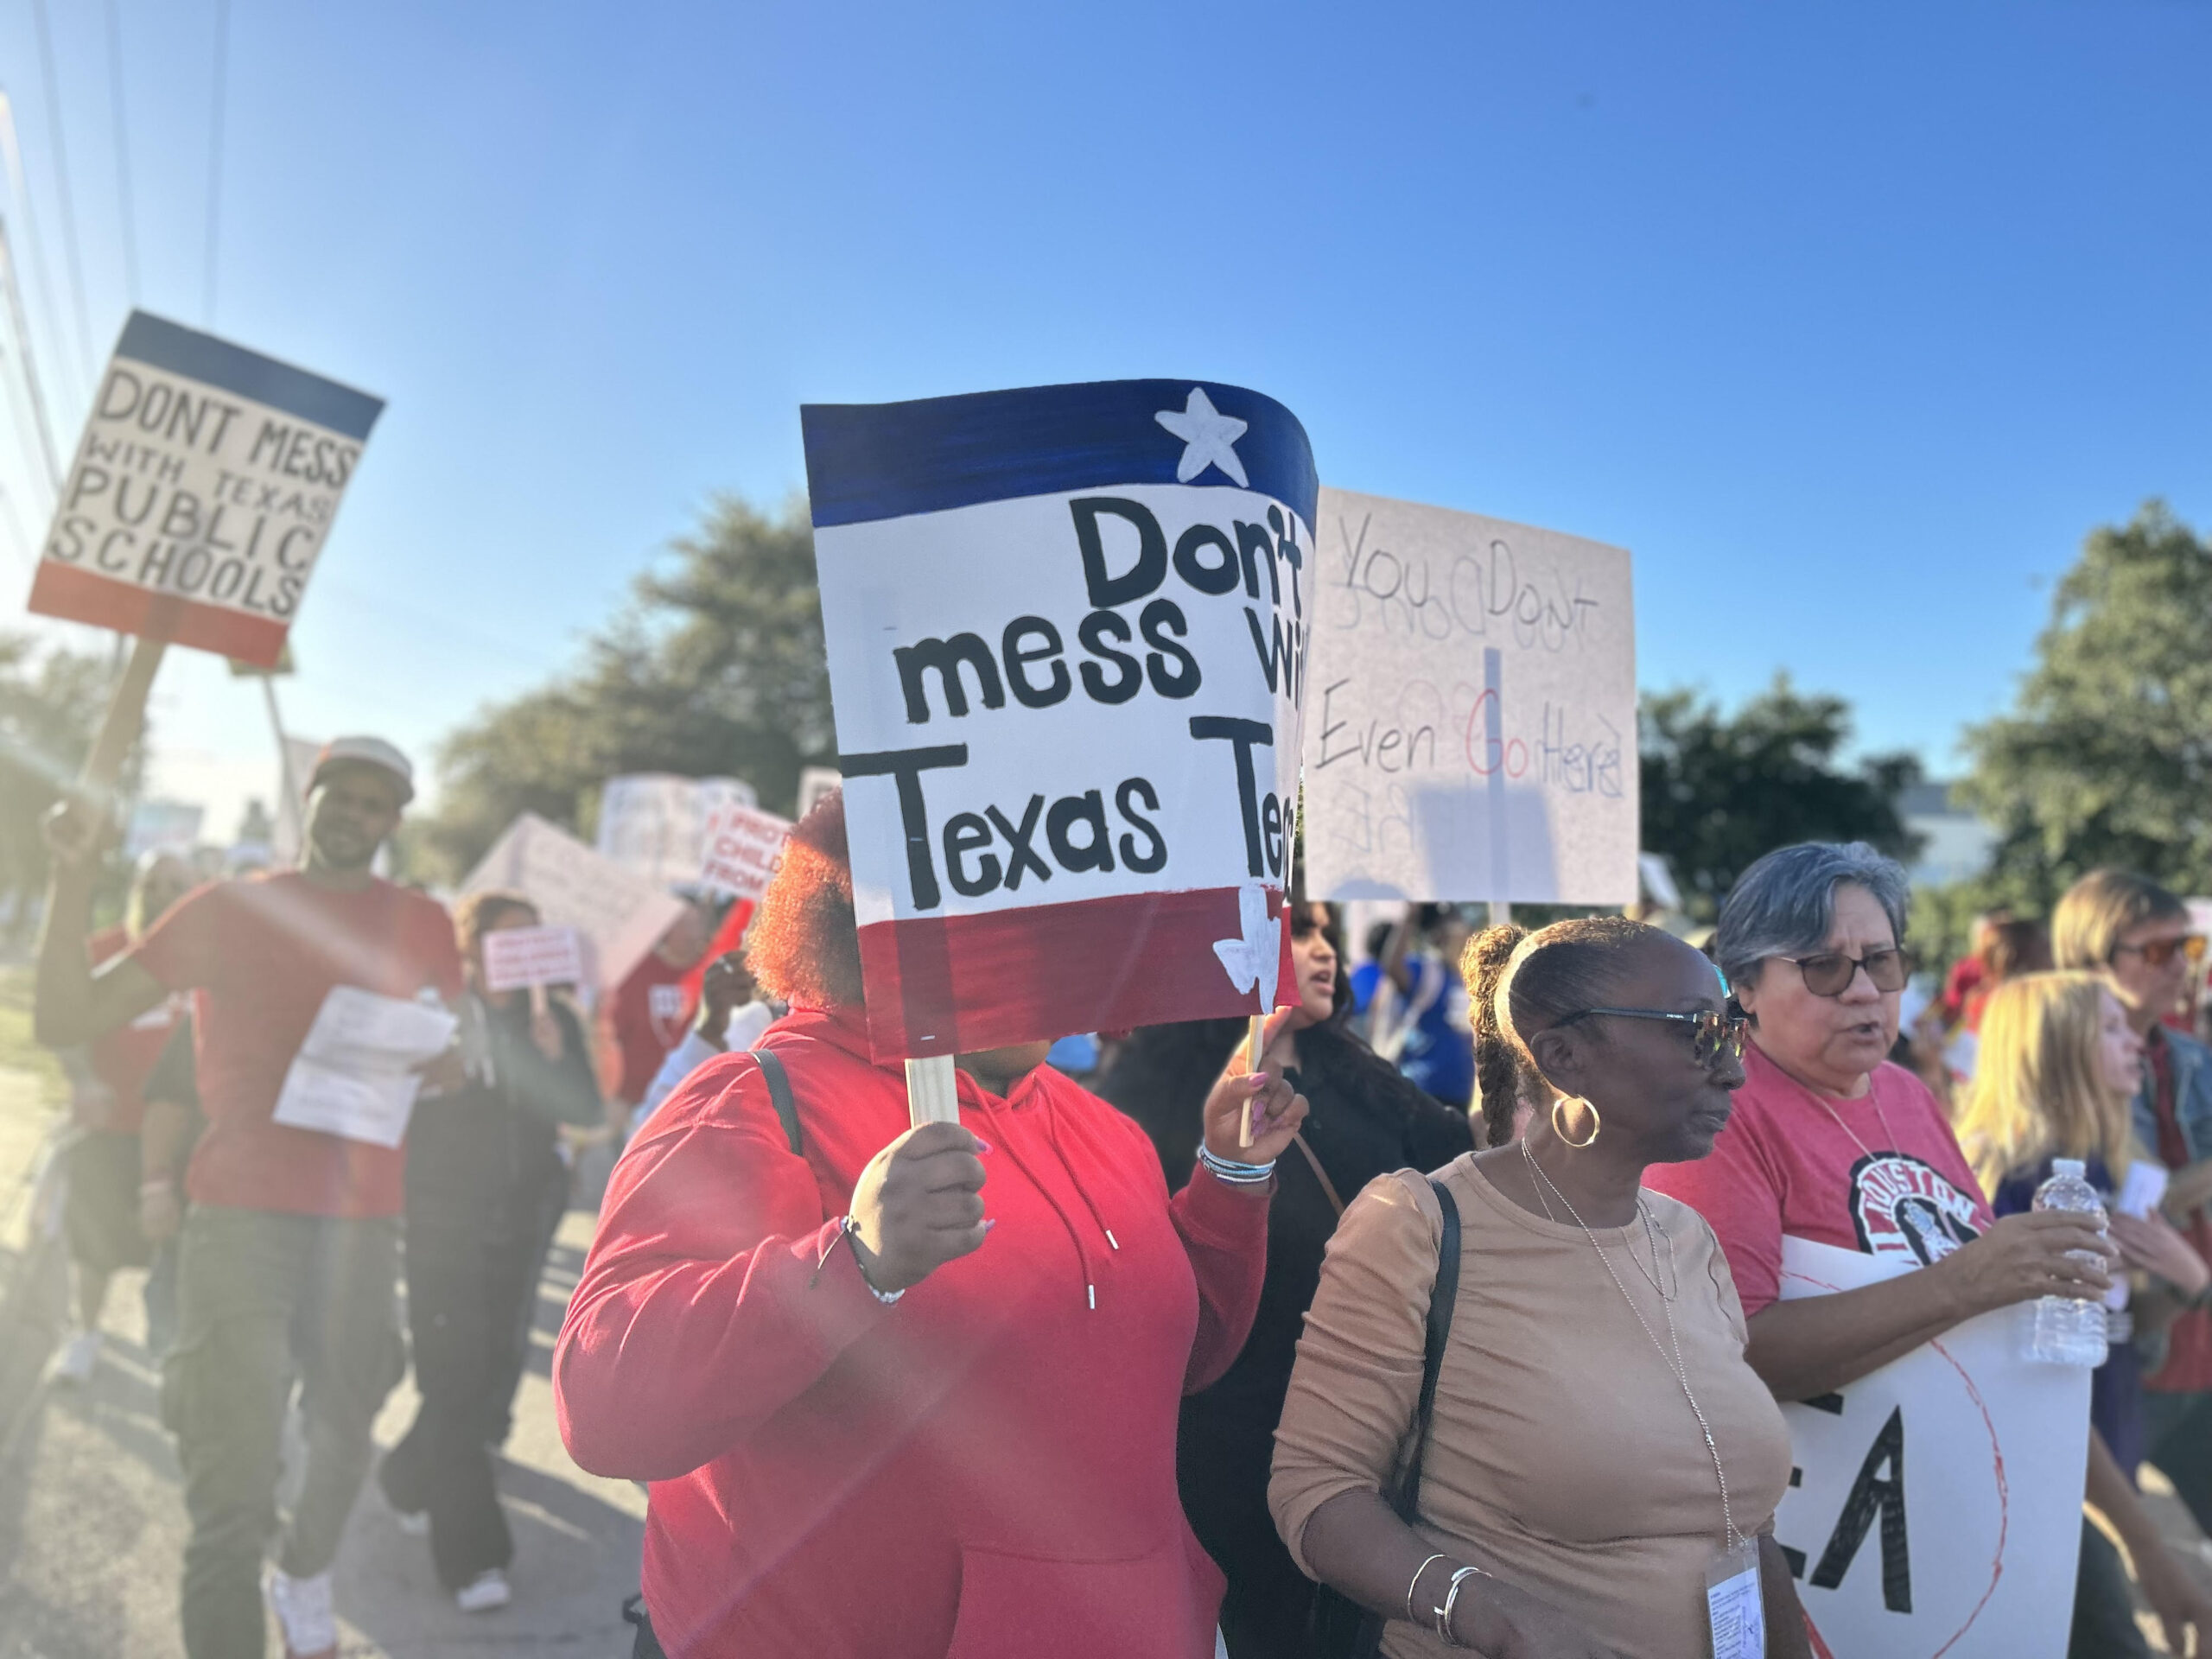 A diverse crowd marches against the takeover of Houston ISD. In front are two Black women, one holding a Don't Mess With Texas Teachers sign.